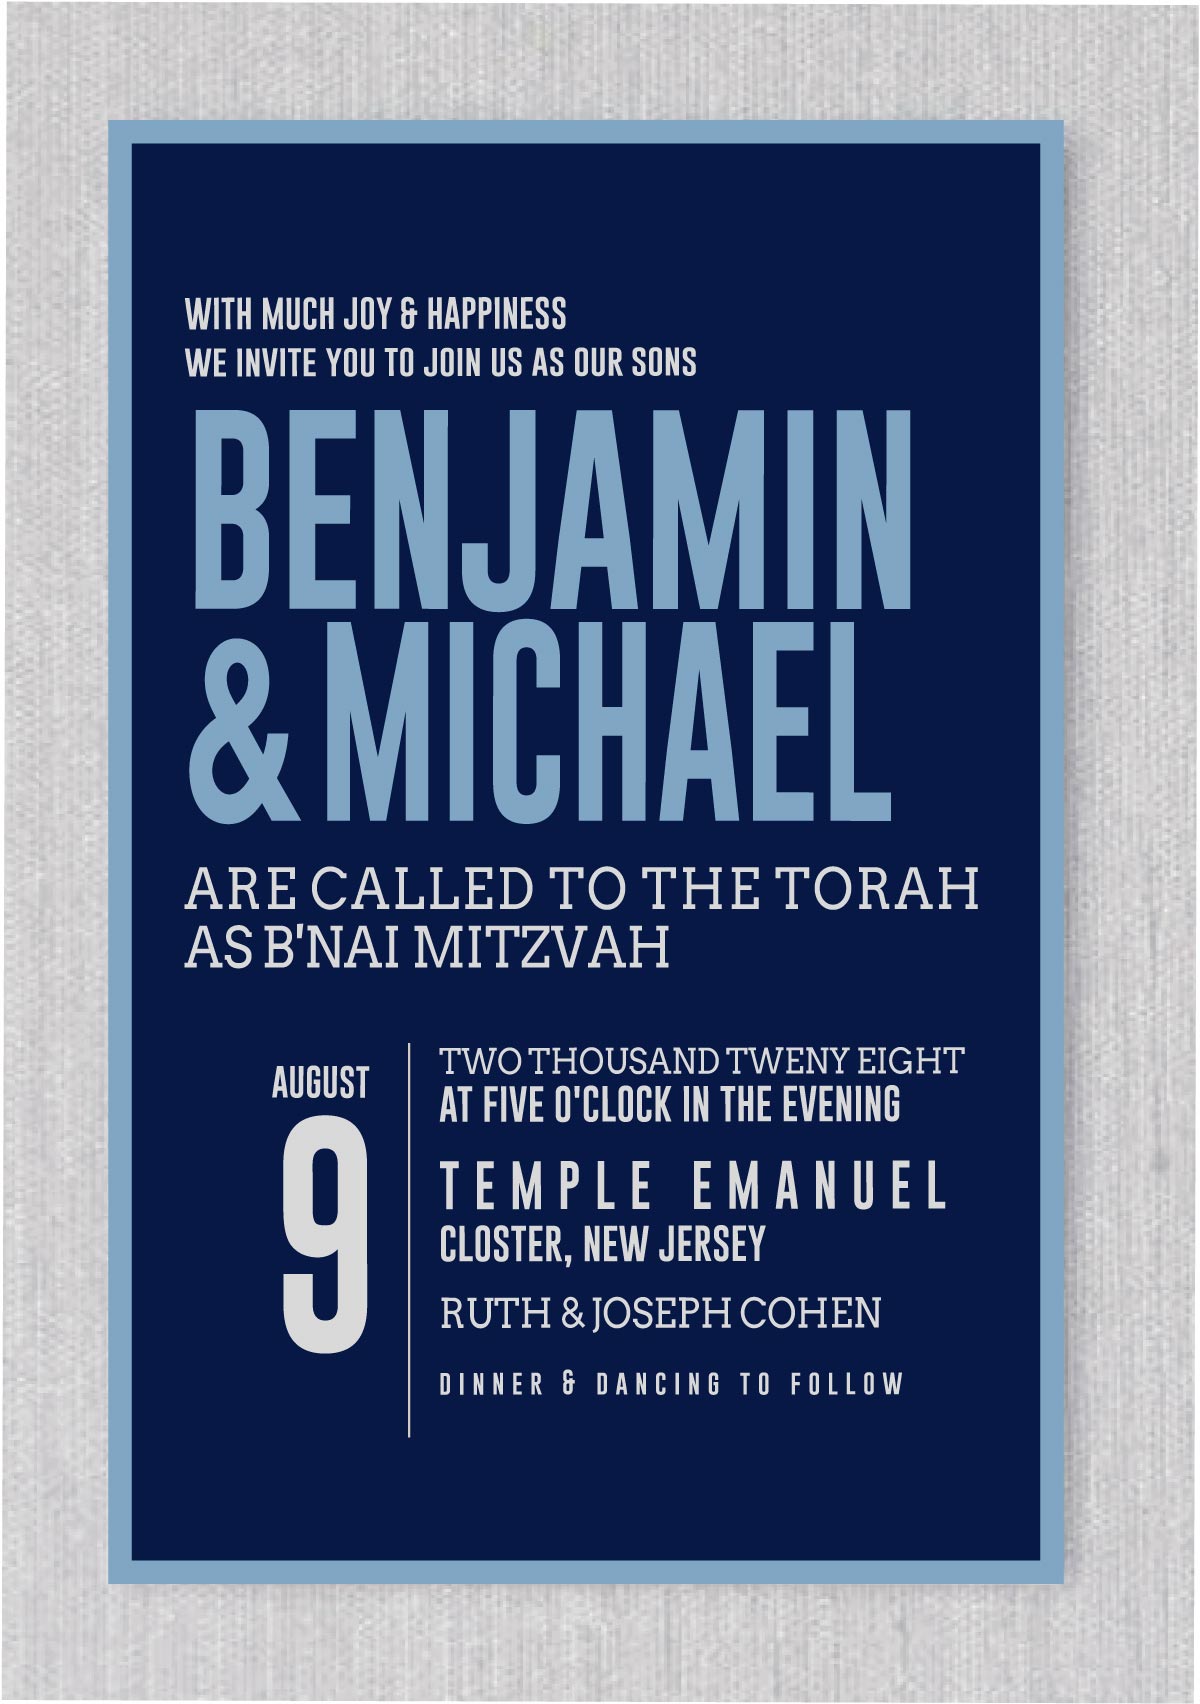 This B’nai Mitzvah modern Blue Bar Mitzvah Invitations is modern, unique and elegant. Matching lined envelopes, rsvp cards, and thank you notes are also available.